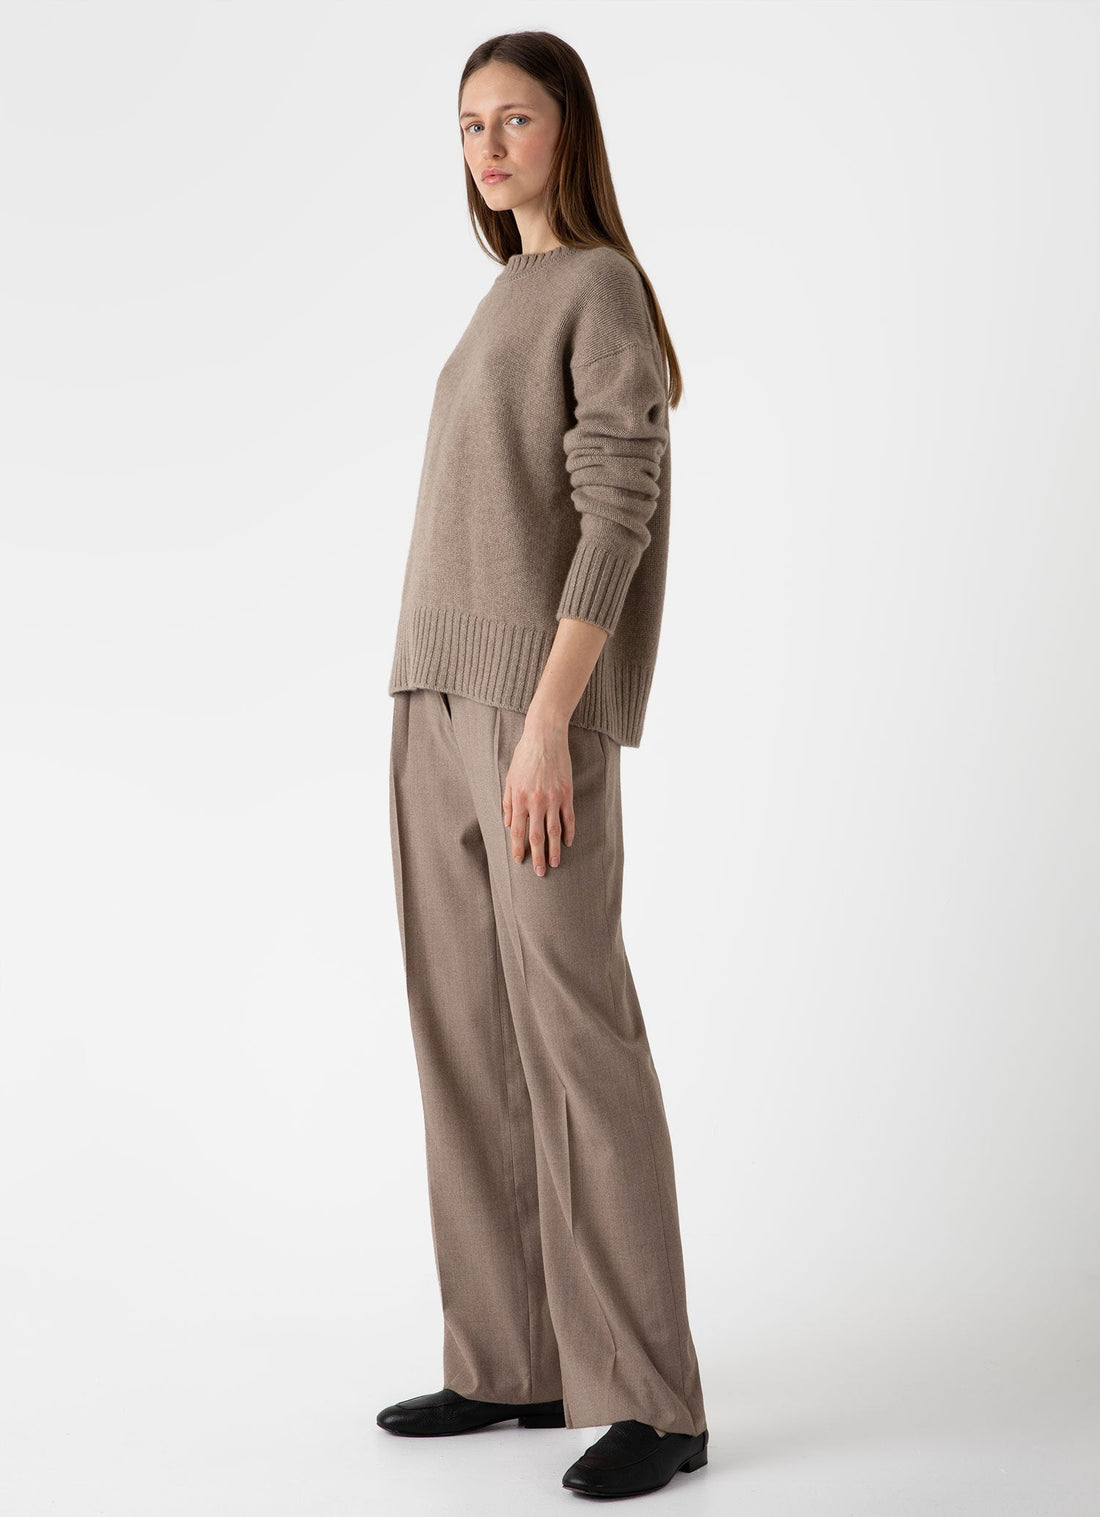 Women's Luxurious Cashmere Jumper in Natural Brown